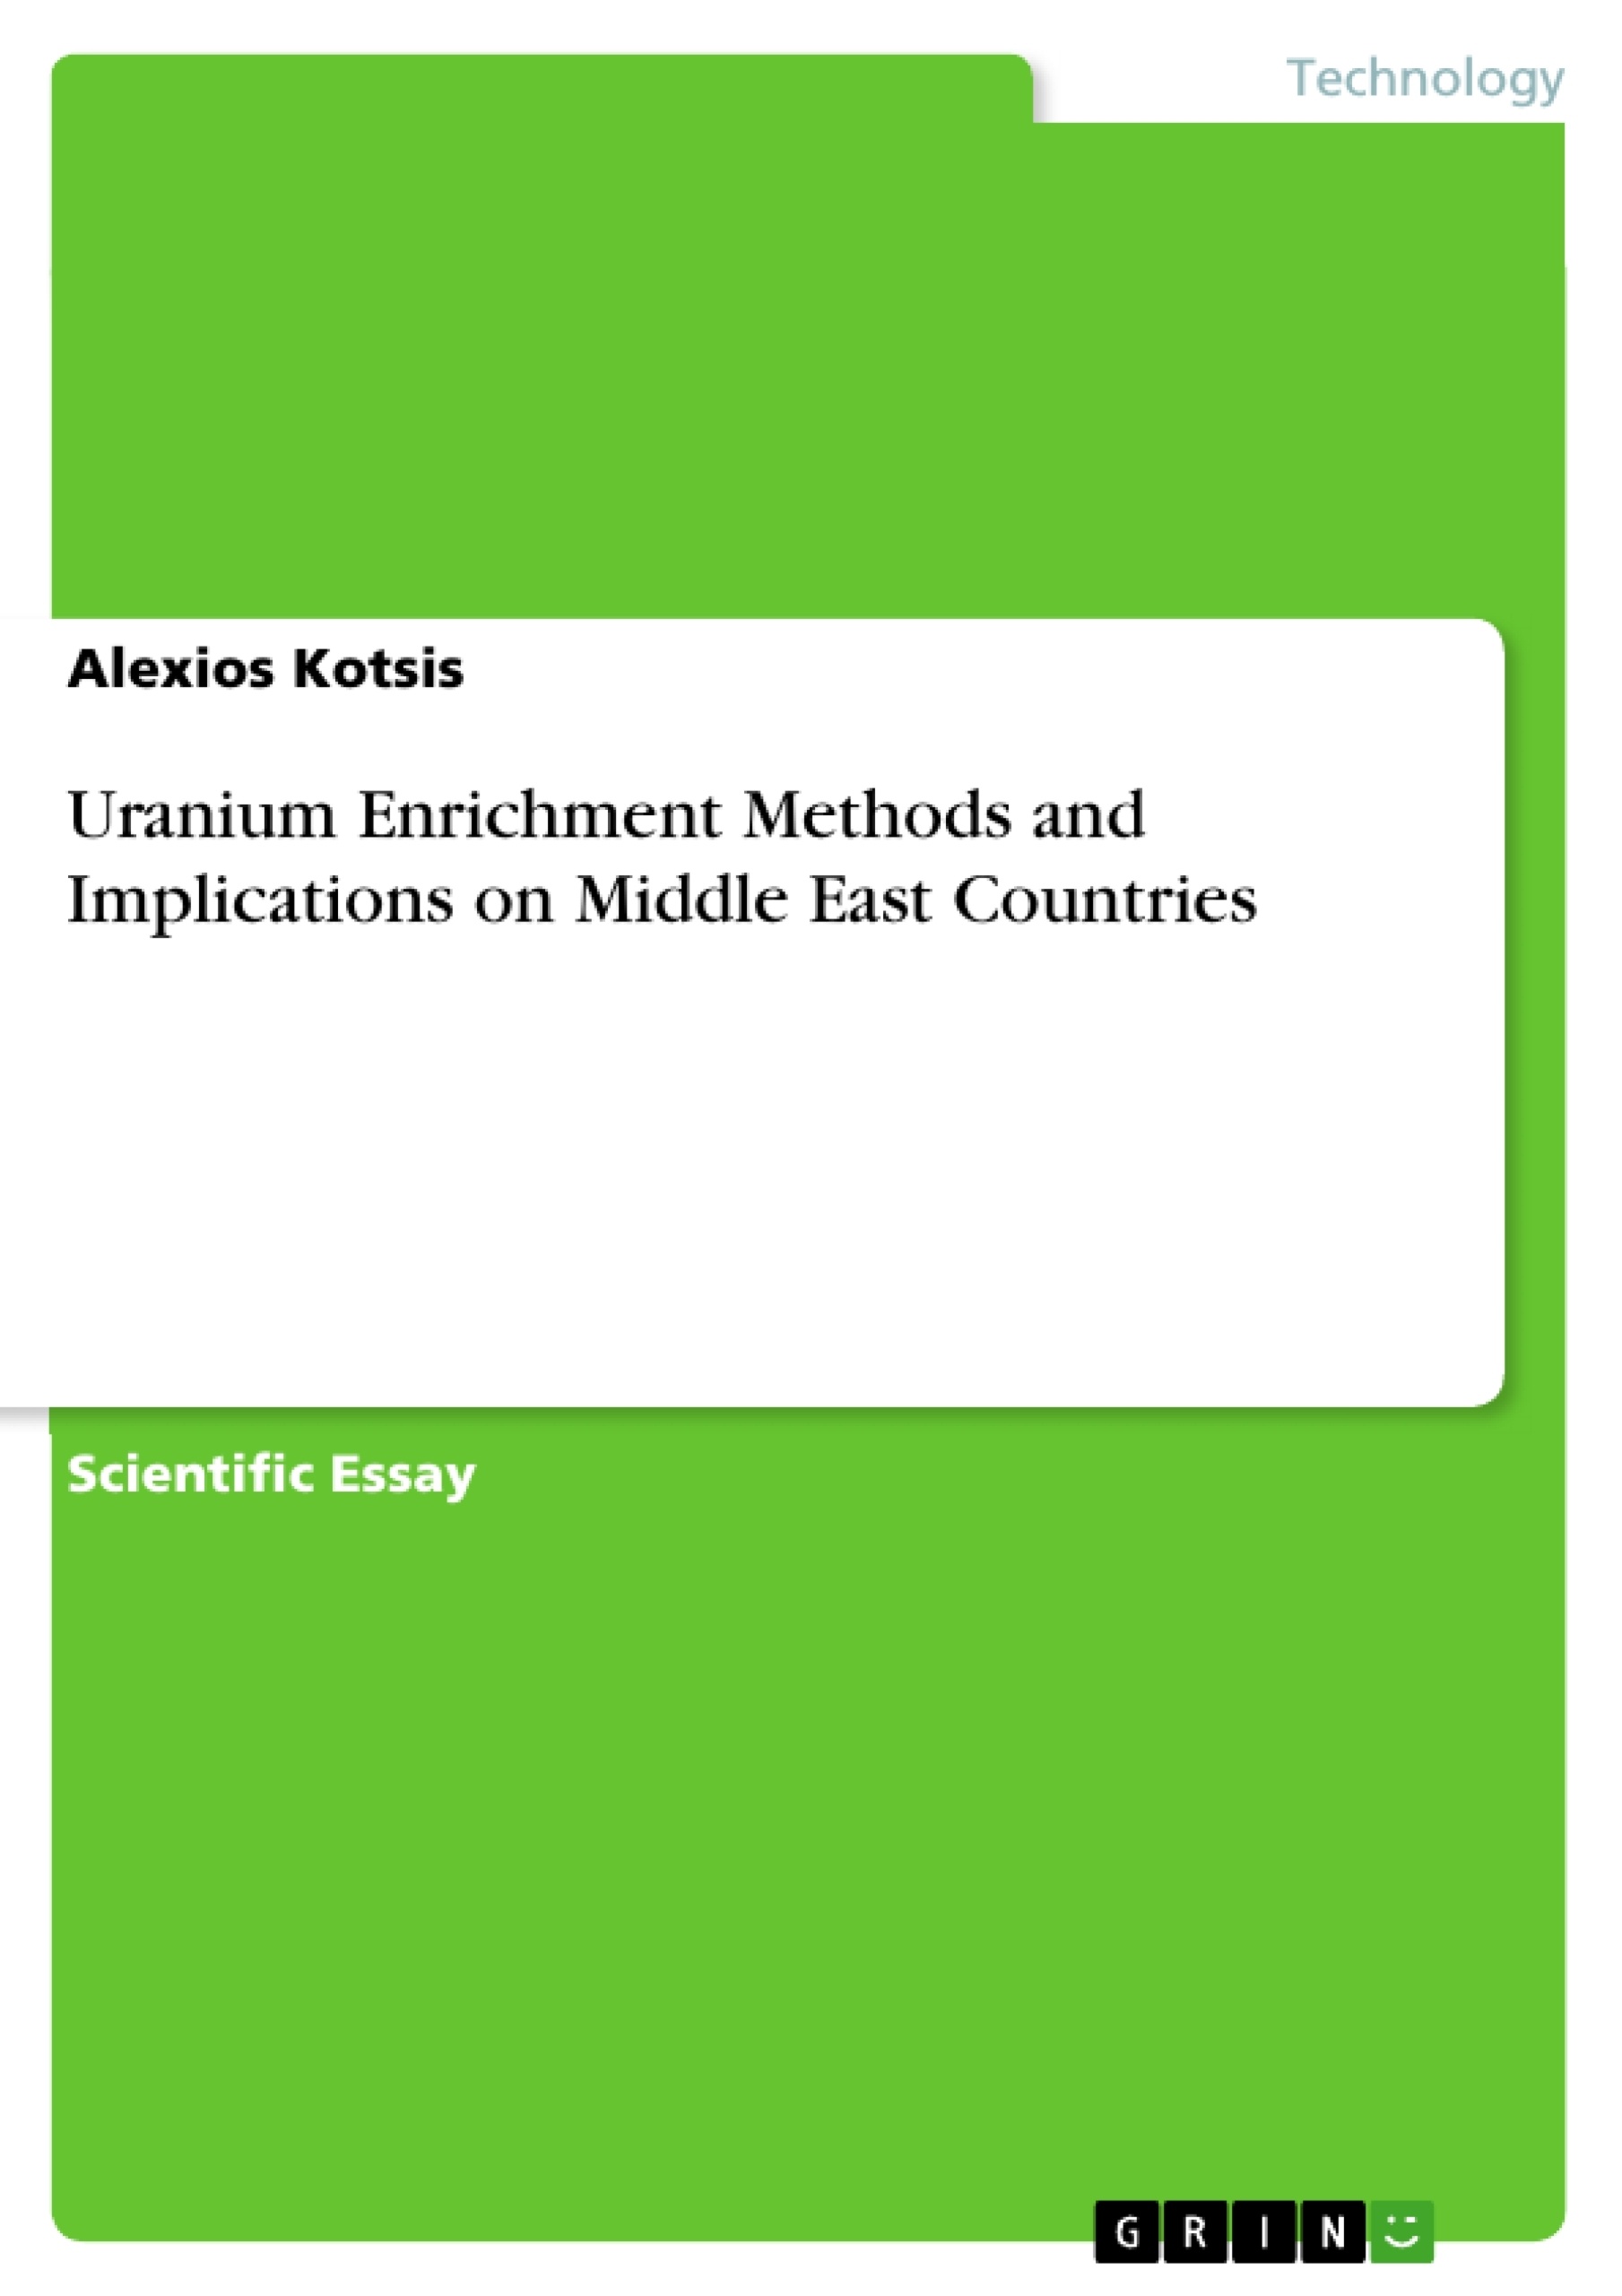 Title: Uranium Enrichment Methods and Implications on Middle East Countries